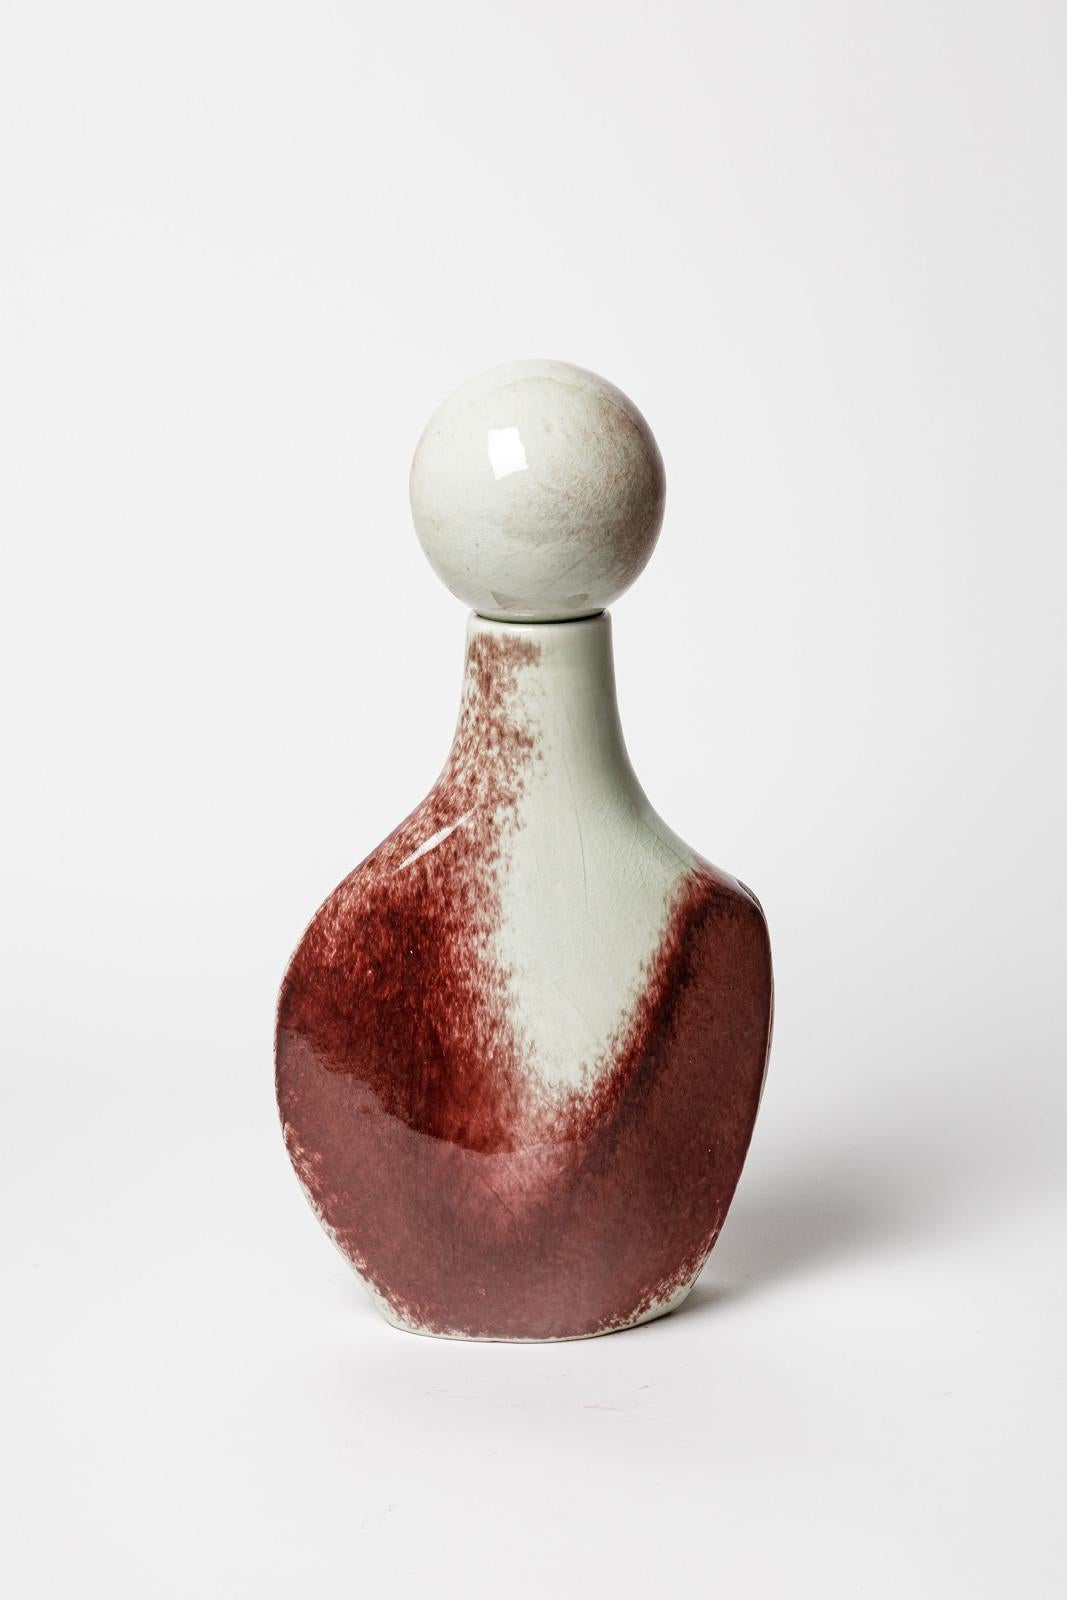 Jacqueline and Tim Orr

Realised circa 1970

Large white and red porcelain ceramic bottle or vase

Signed

Orginal perfct condition

Height 32 cm
Large 18 cm